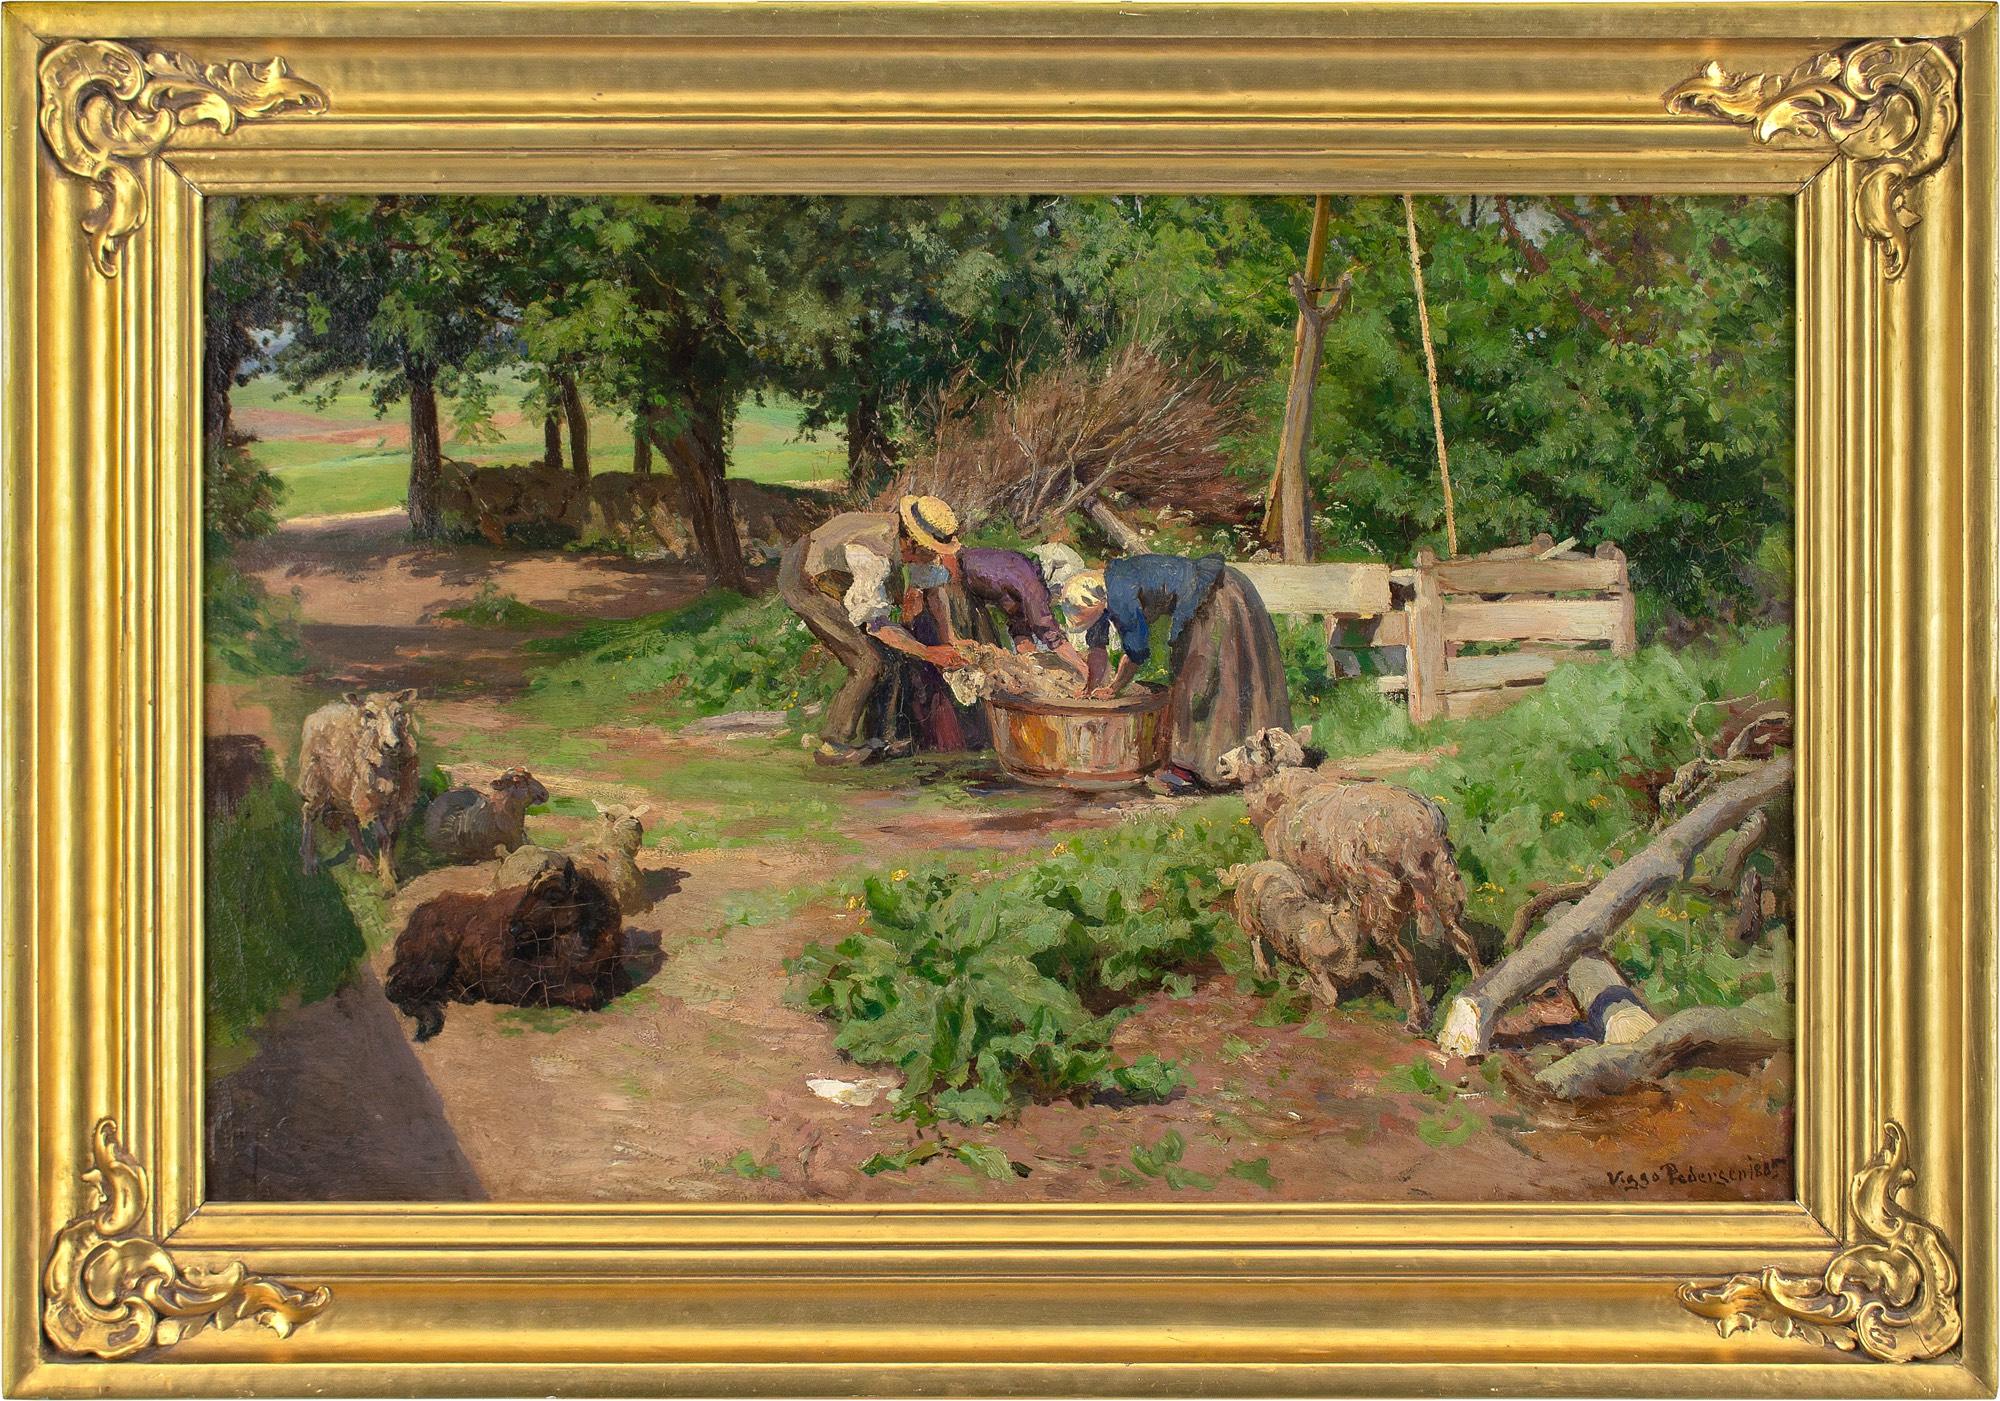 This splendid late 19th-century oil painting by Danish artist Viggo Pedersen (1854-1926) depicts three figures shearing a sheep in a slatted barrel.

Working in a woodland clearing, they grapple with its feisty limbs while several others look on -